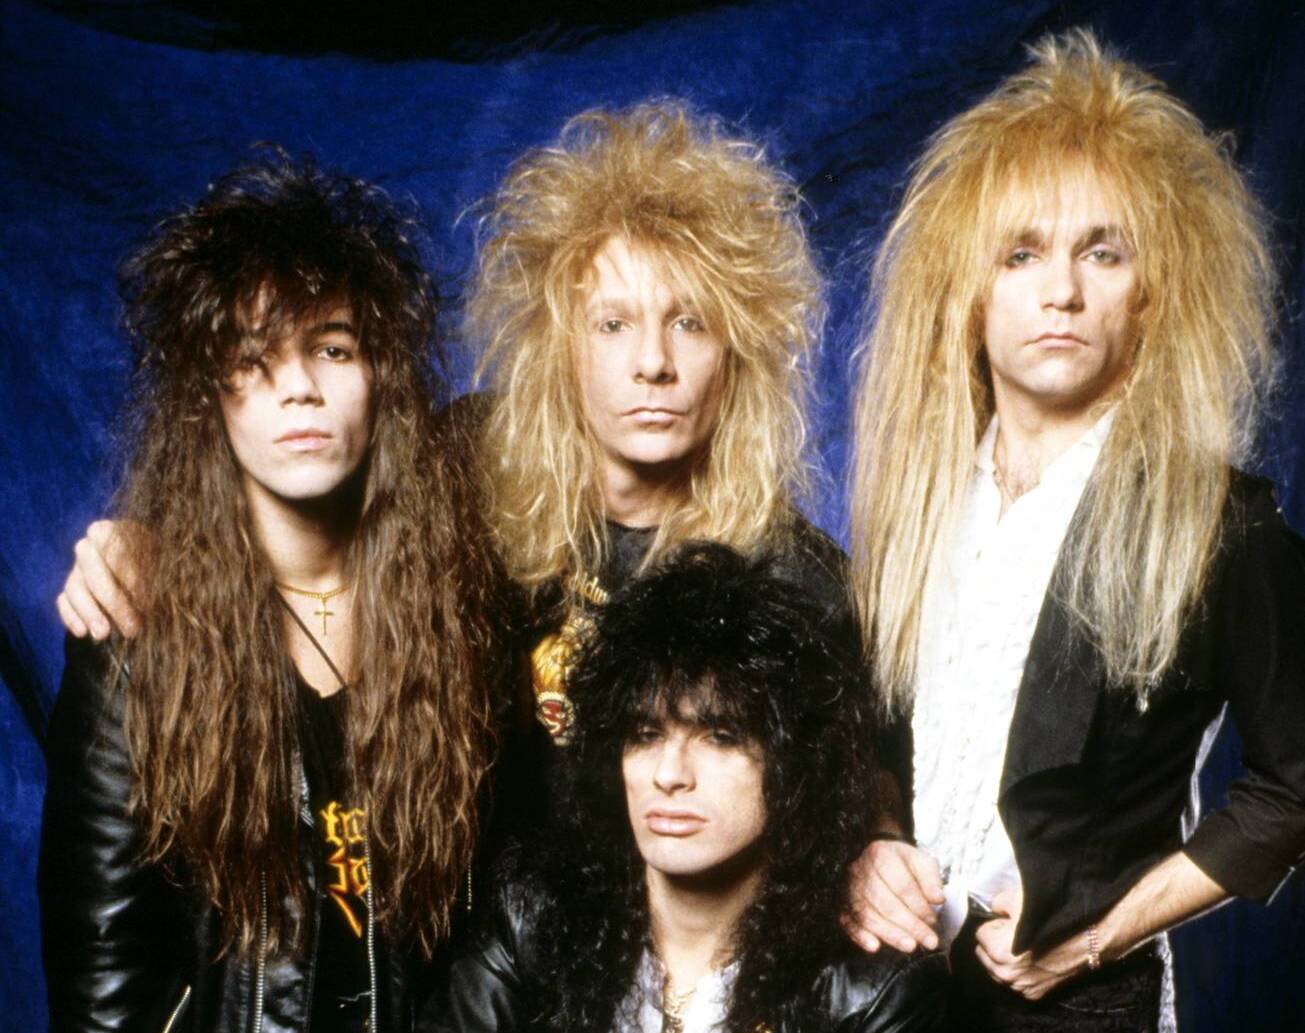 <p>This Philly-bred four-piece group might have had the biggest and highest hair of all the hair/glam metal bands. Britny Fox was relevant for just a short time in the 1980s, specifically after its self-titled 1988 release. Compared to other stuff on the scene at the time, it was above-average and more rock-orientated. <a href="https://www.youtube.com/watch?v=qbEIi46NAno" rel="noopener noreferrer">"Long Way to Love" </a>and "Girlschool" were the band's most notable hits.</p><p>You may also like: <a href='https://www.yardbarker.com/entertainment/articles/the_25_best_episodes_of_the_rockford_files_011224/s1__35232449'>The 25 best episodes of 'The Rockford Files'</a></p>